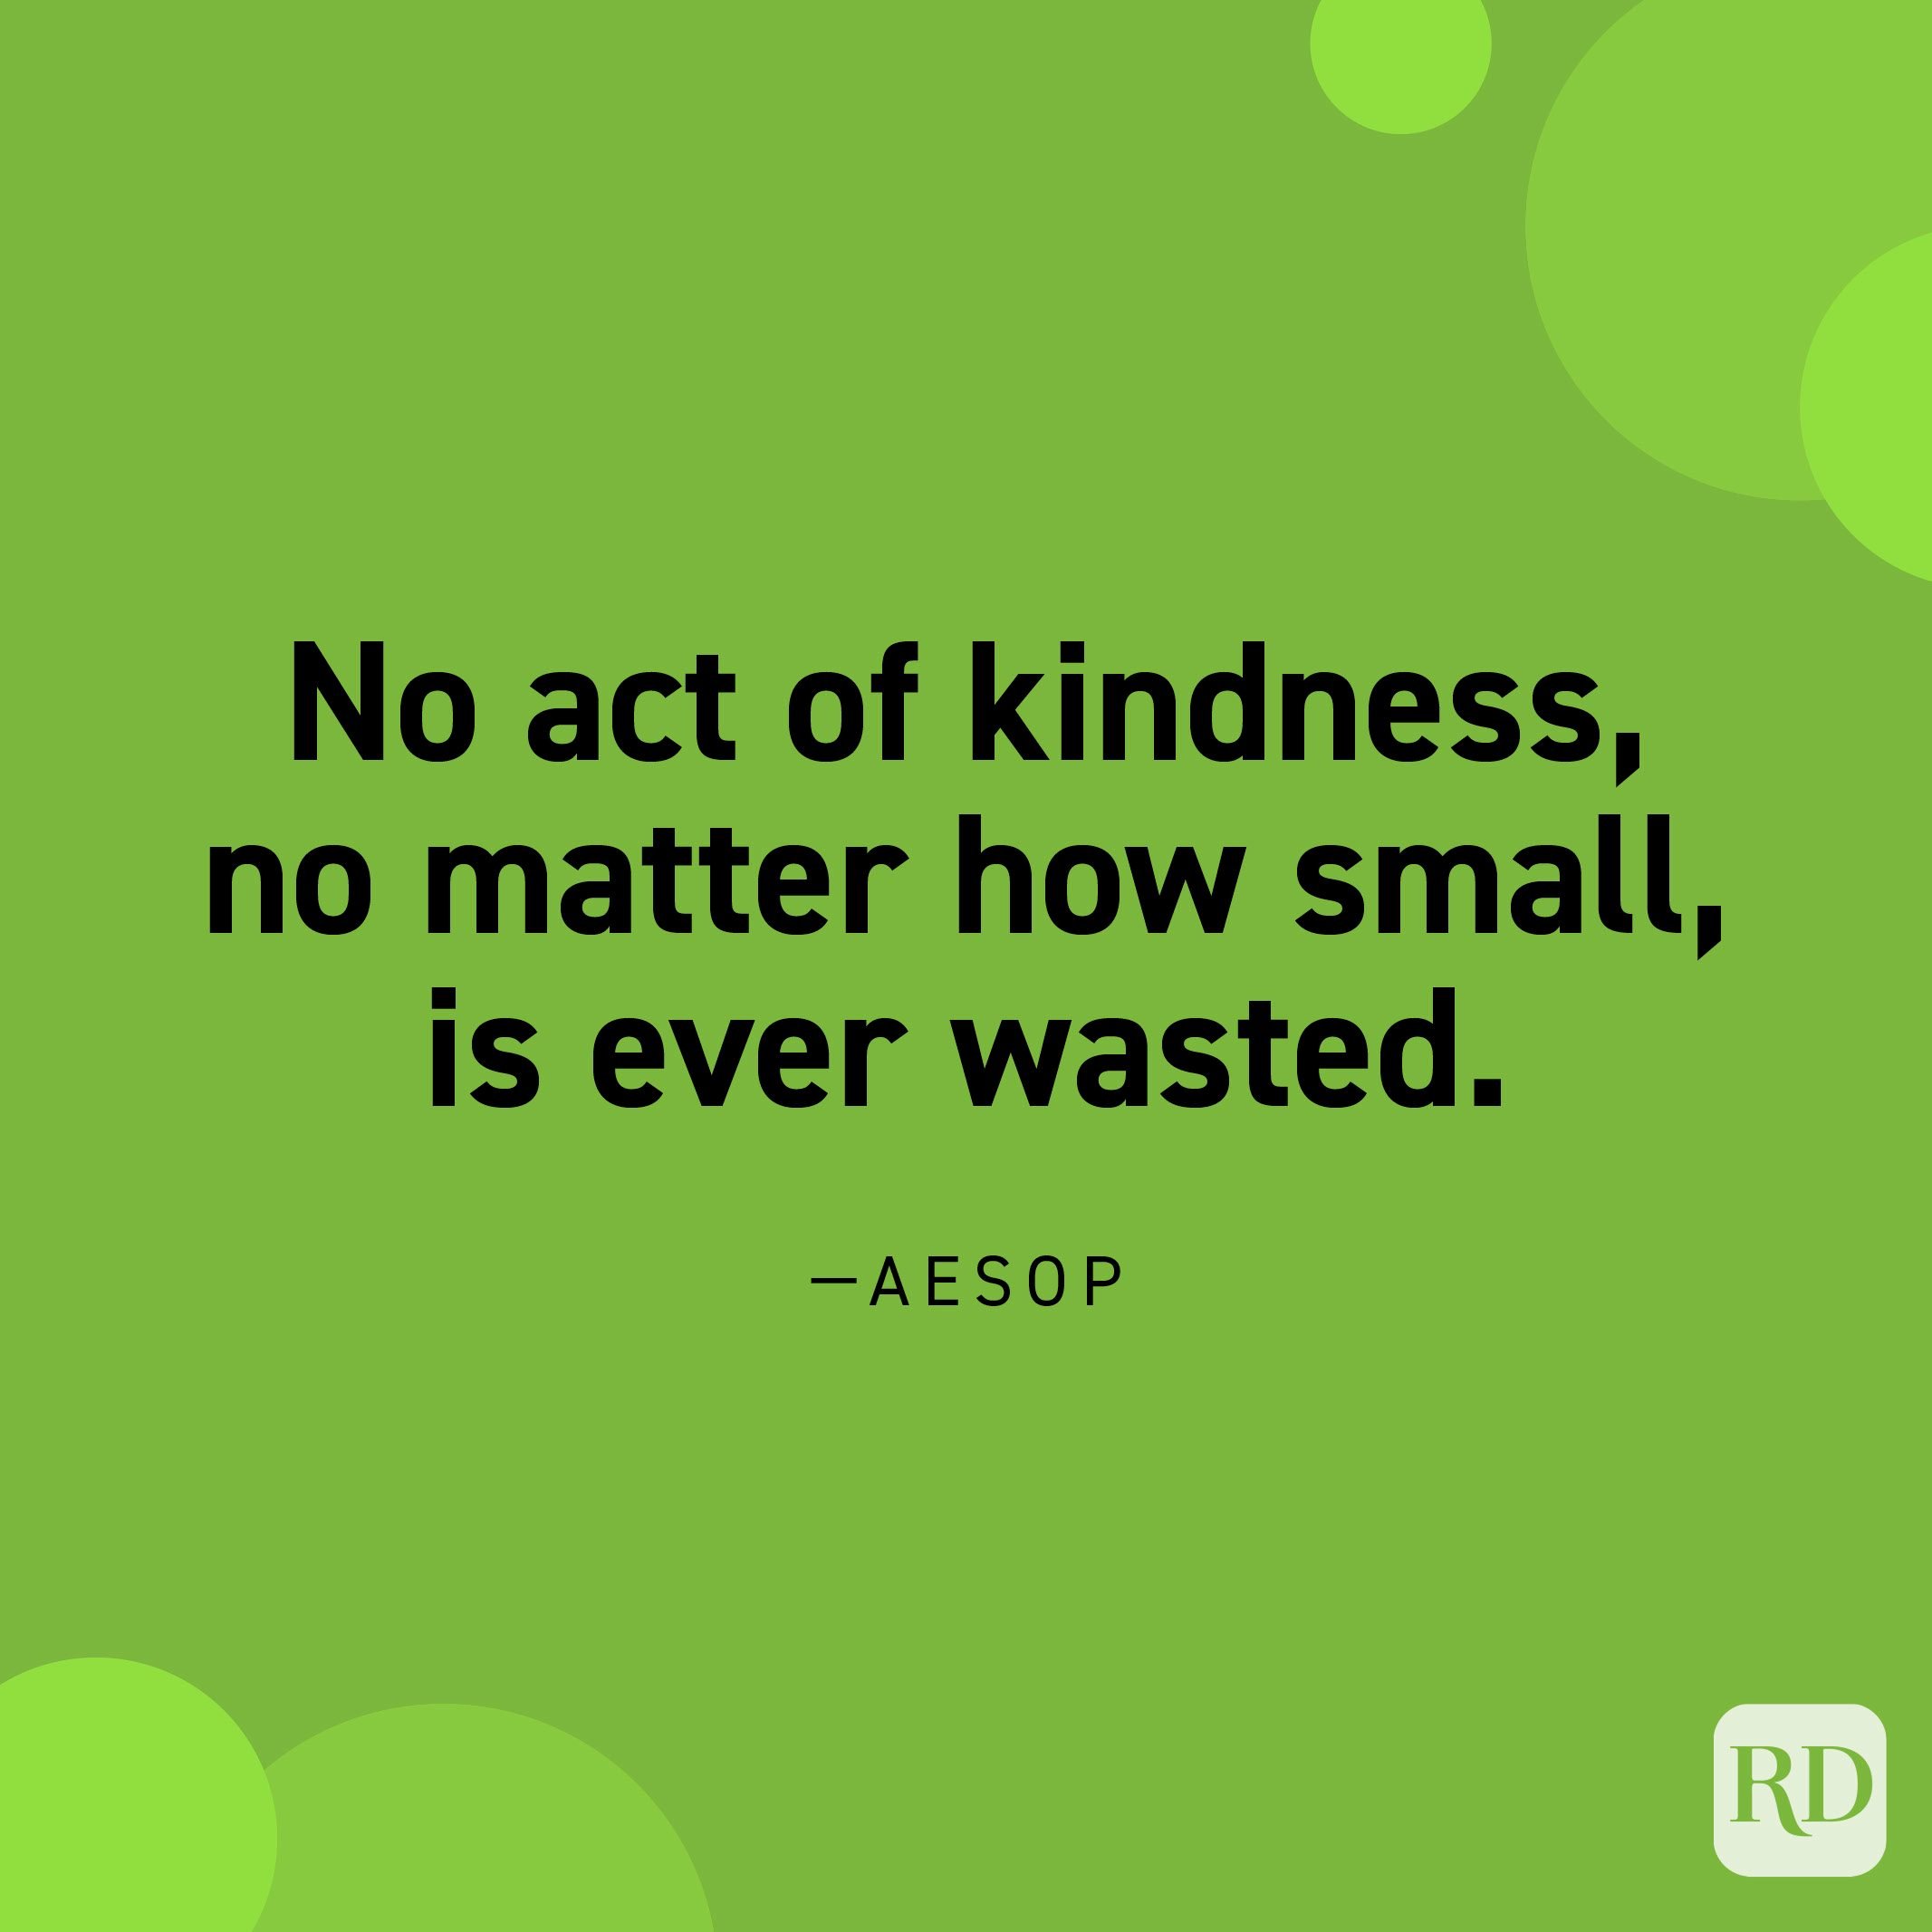 60 Kindness Quotes That Will Stay With You | Reader's Digest